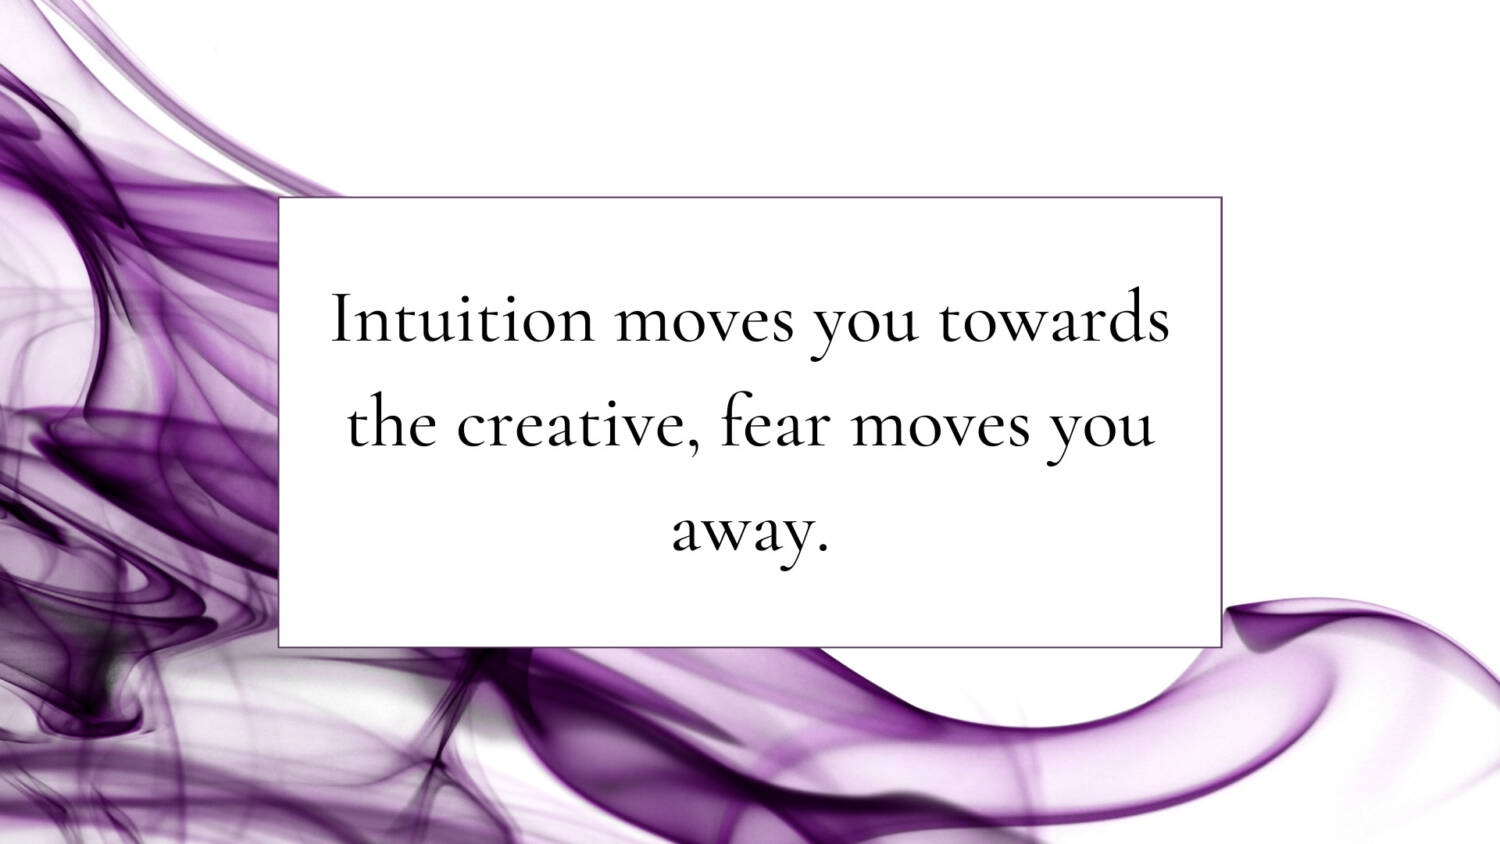 Intuition moves you towards the creative, fear moves you away.